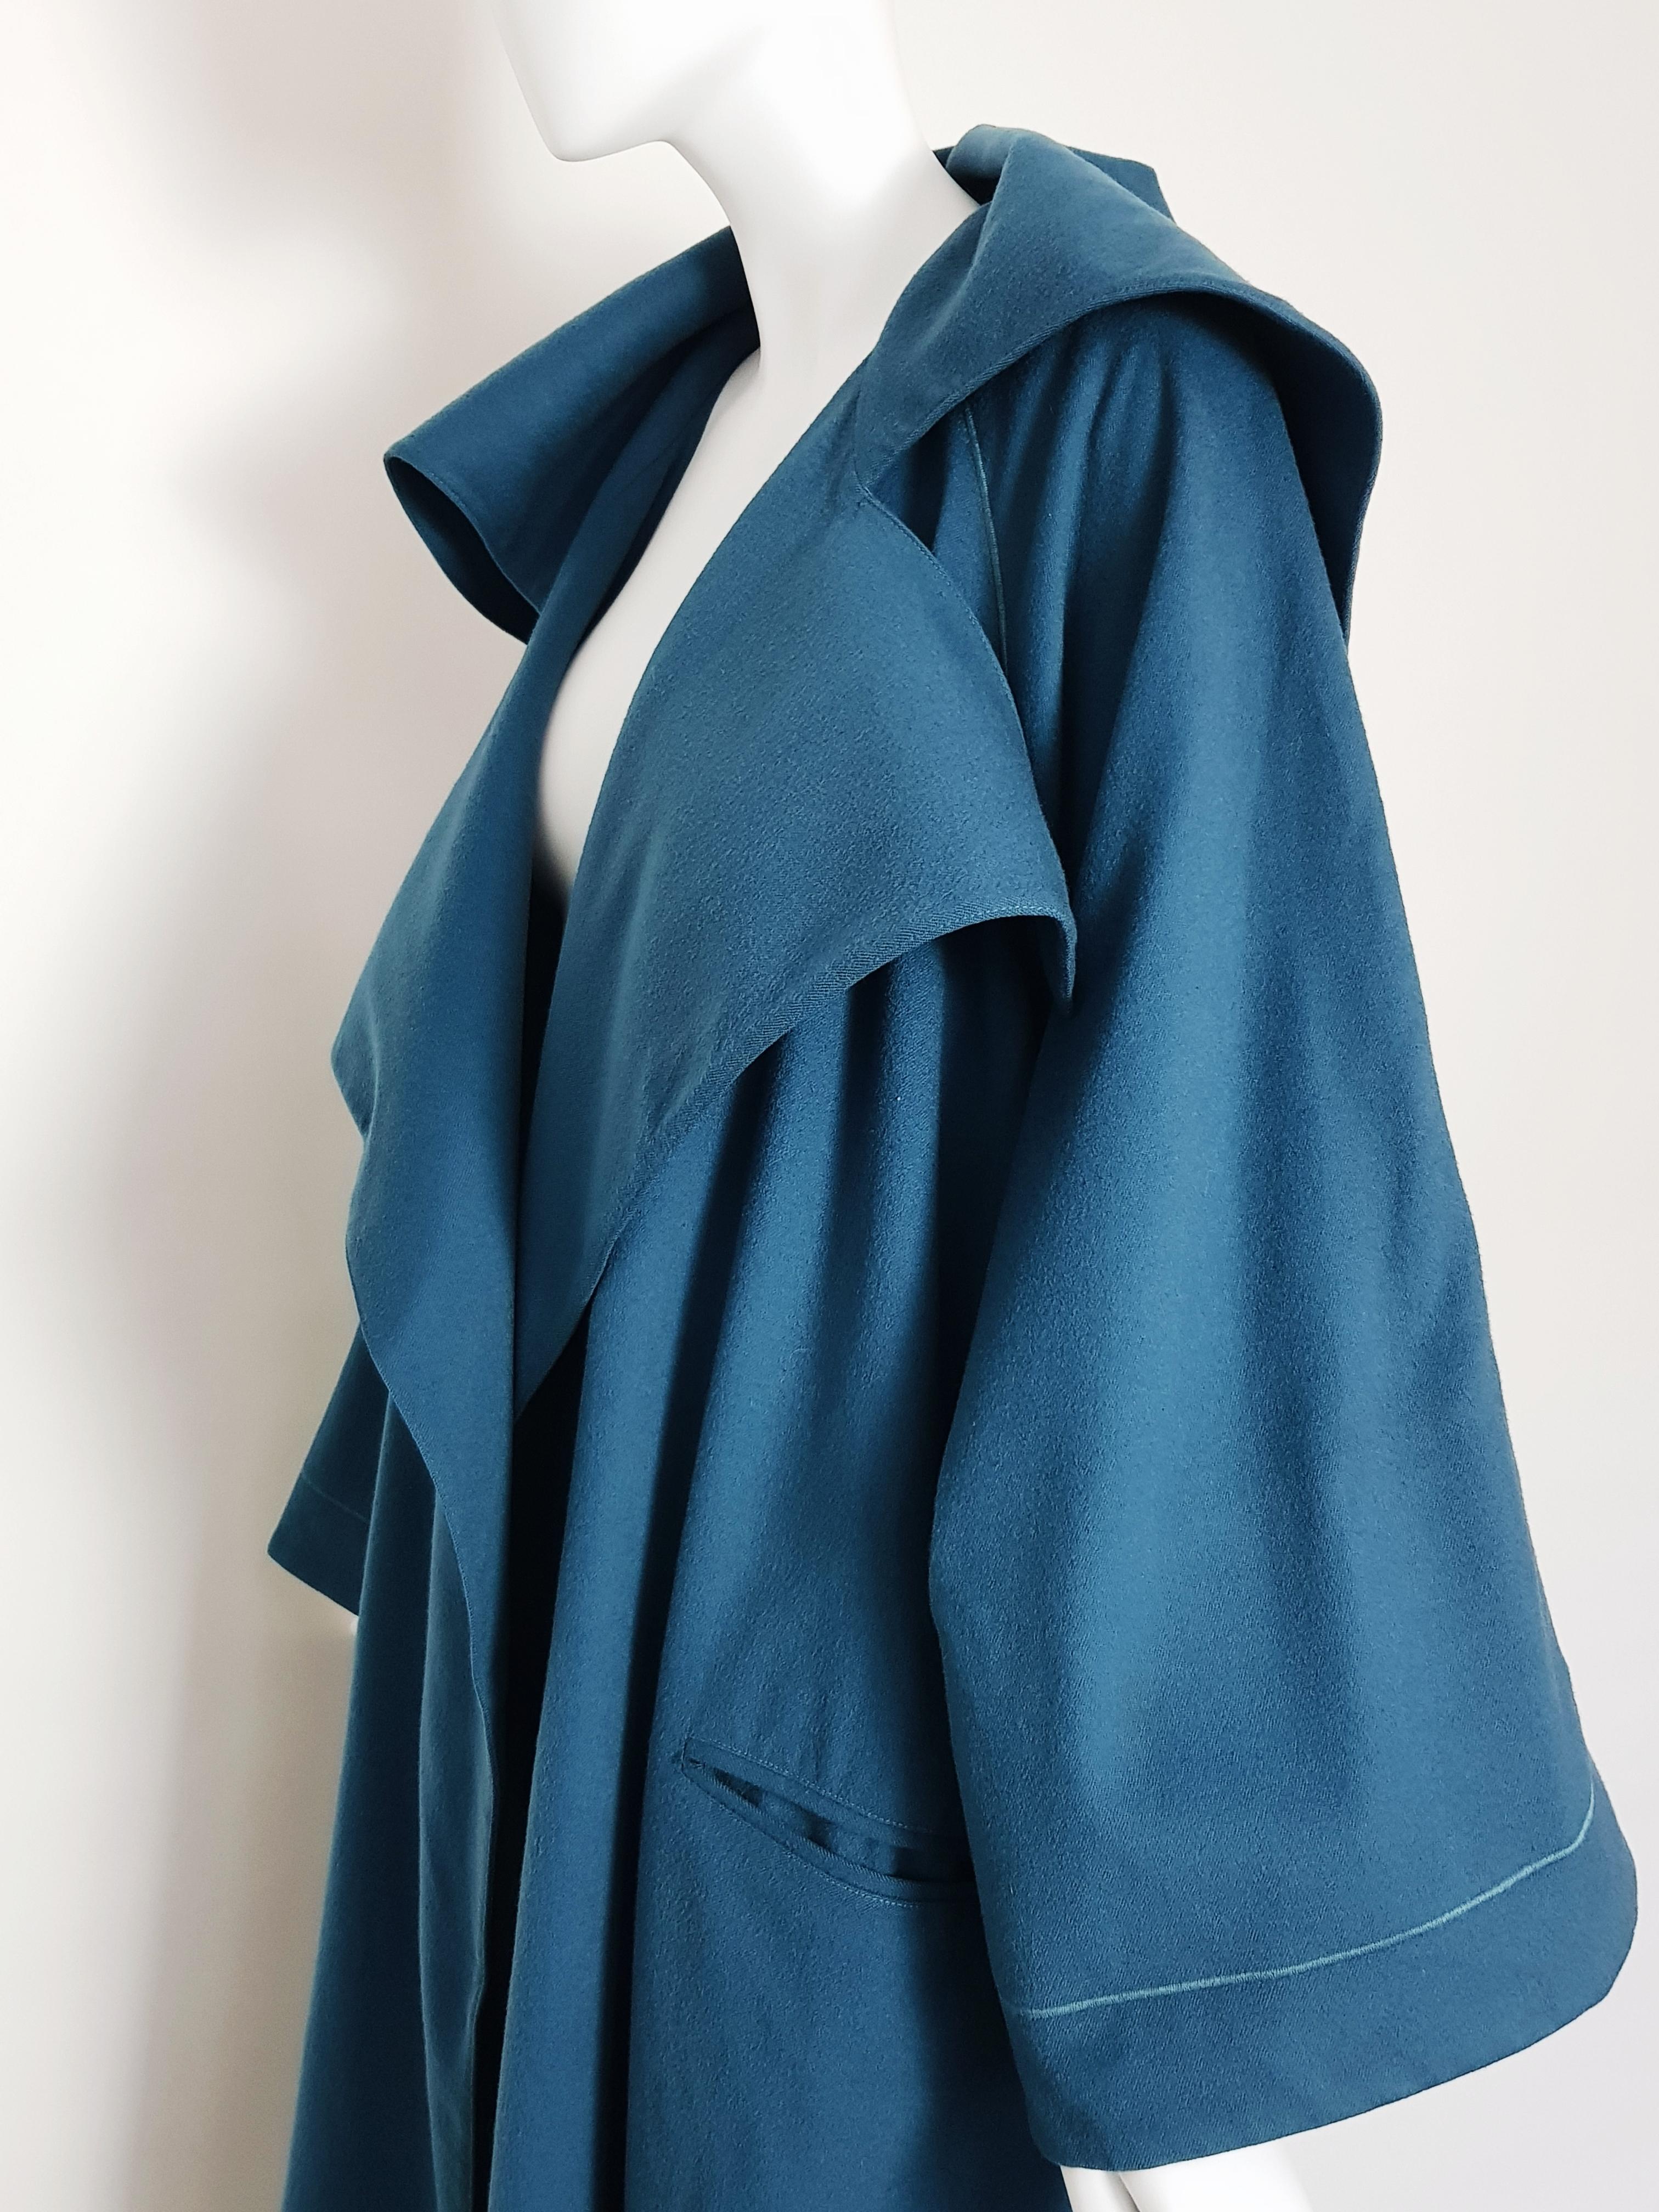 Coat by Montana

-Generous structured collar
-Deep teal color
-Kimono silhouette sleeves
-Oversize fitting
-Two inseam hip pockets
-Made in Italy
-80% Wool / 20% Cashmere
-Estimated size: fits Small - Large (marked size 44FR)
-Very good conditions,